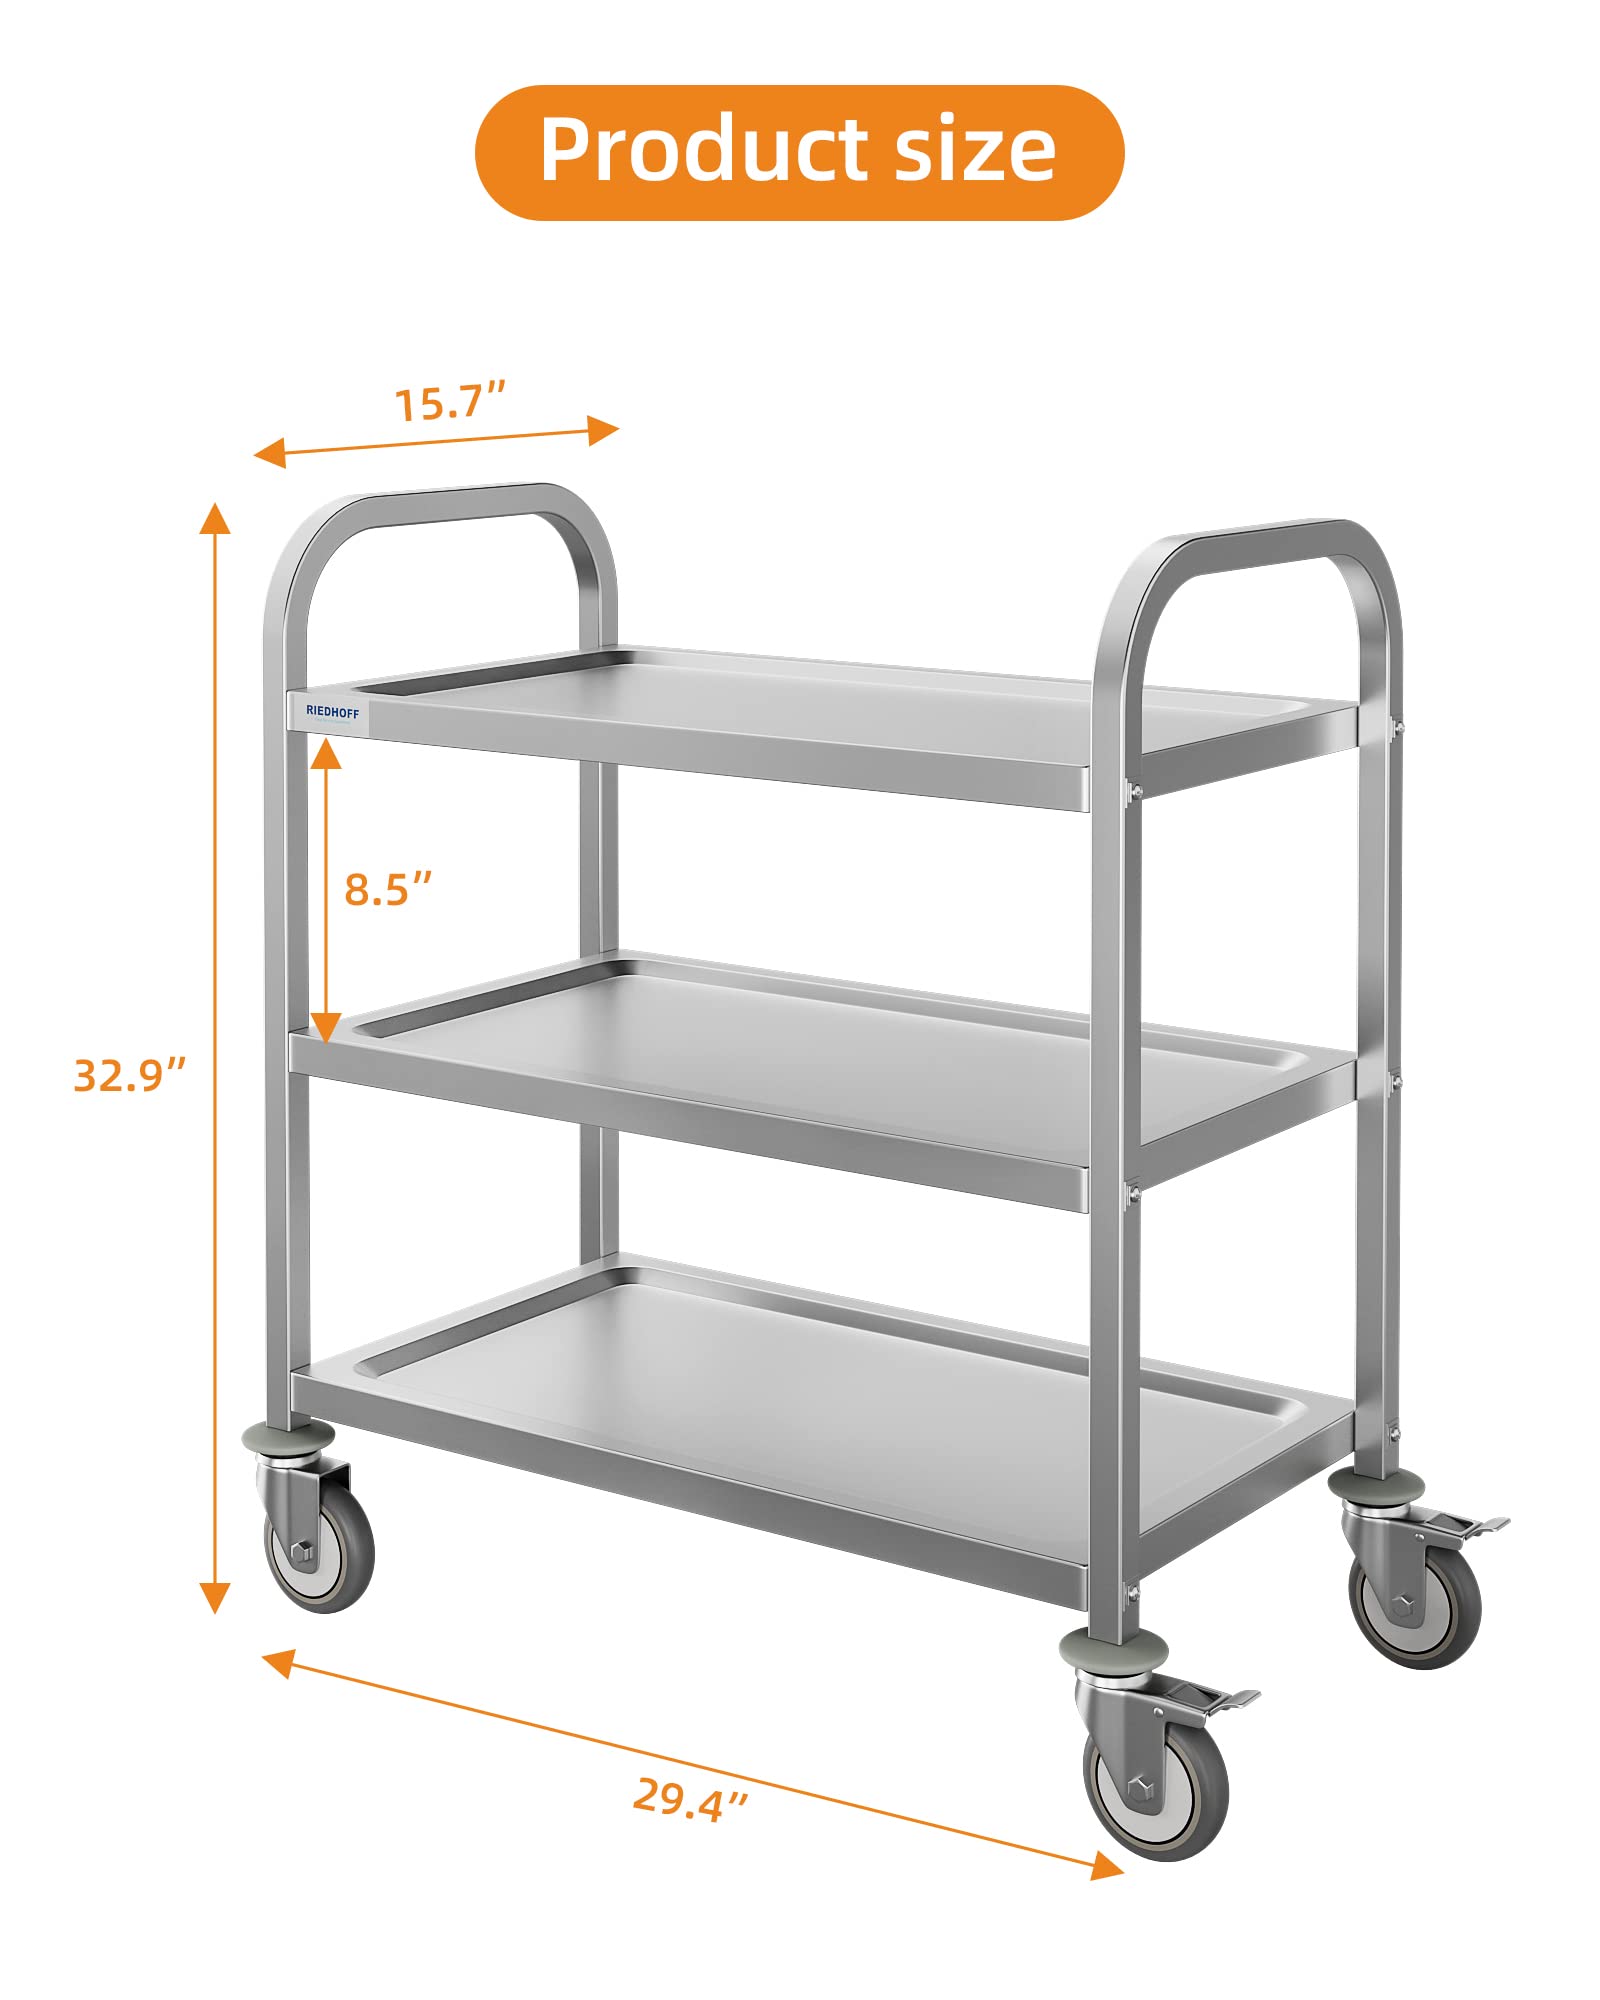 GARVEE 430 Stainless Steel Heavy Duty Utility Cart 3 Shelves Service Carts with Wheels Silver